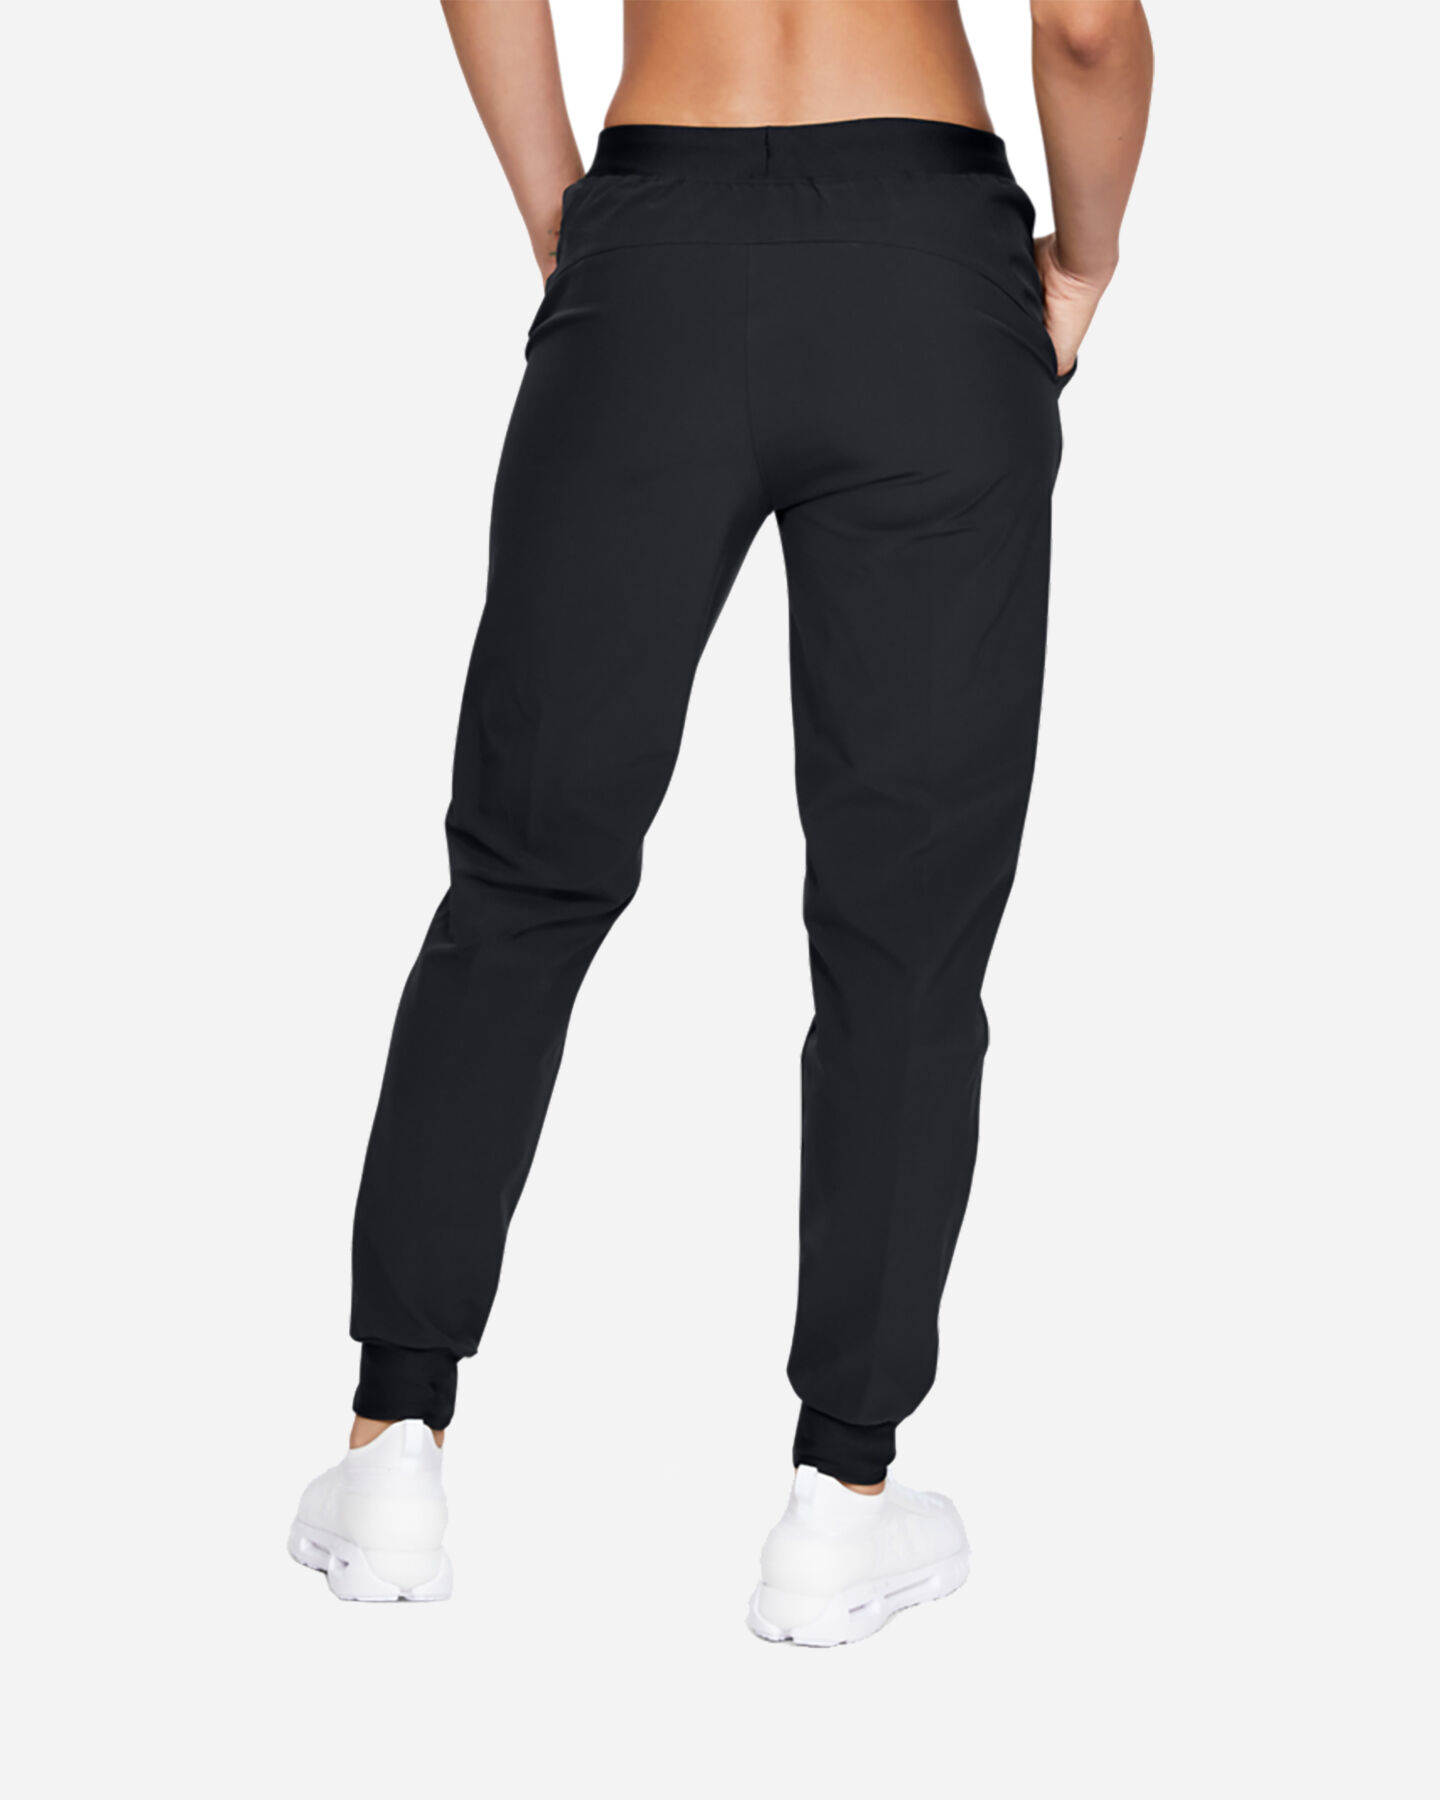  Pantalone UNDER ARMOUR WOVEN W S5168706|0001|XS scatto 1